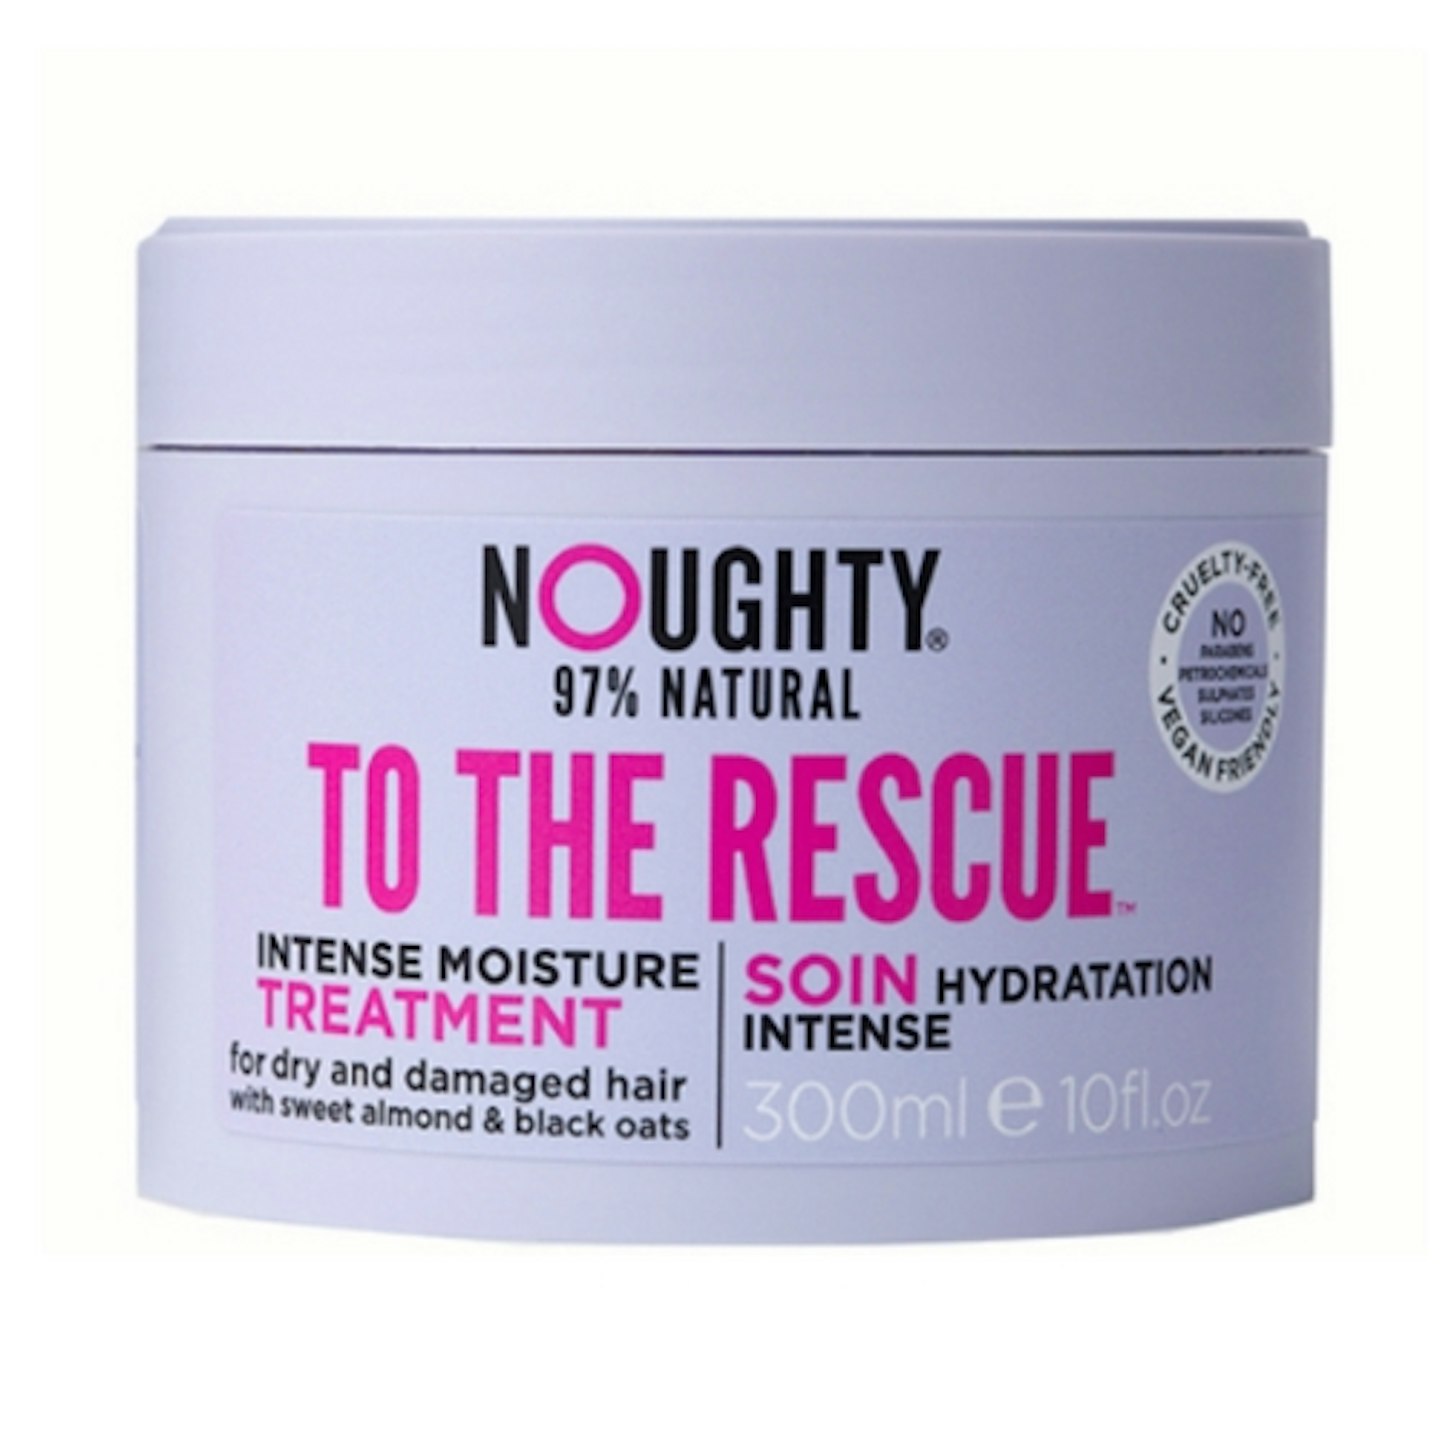 Noughty To The Rescue Treatment Mask